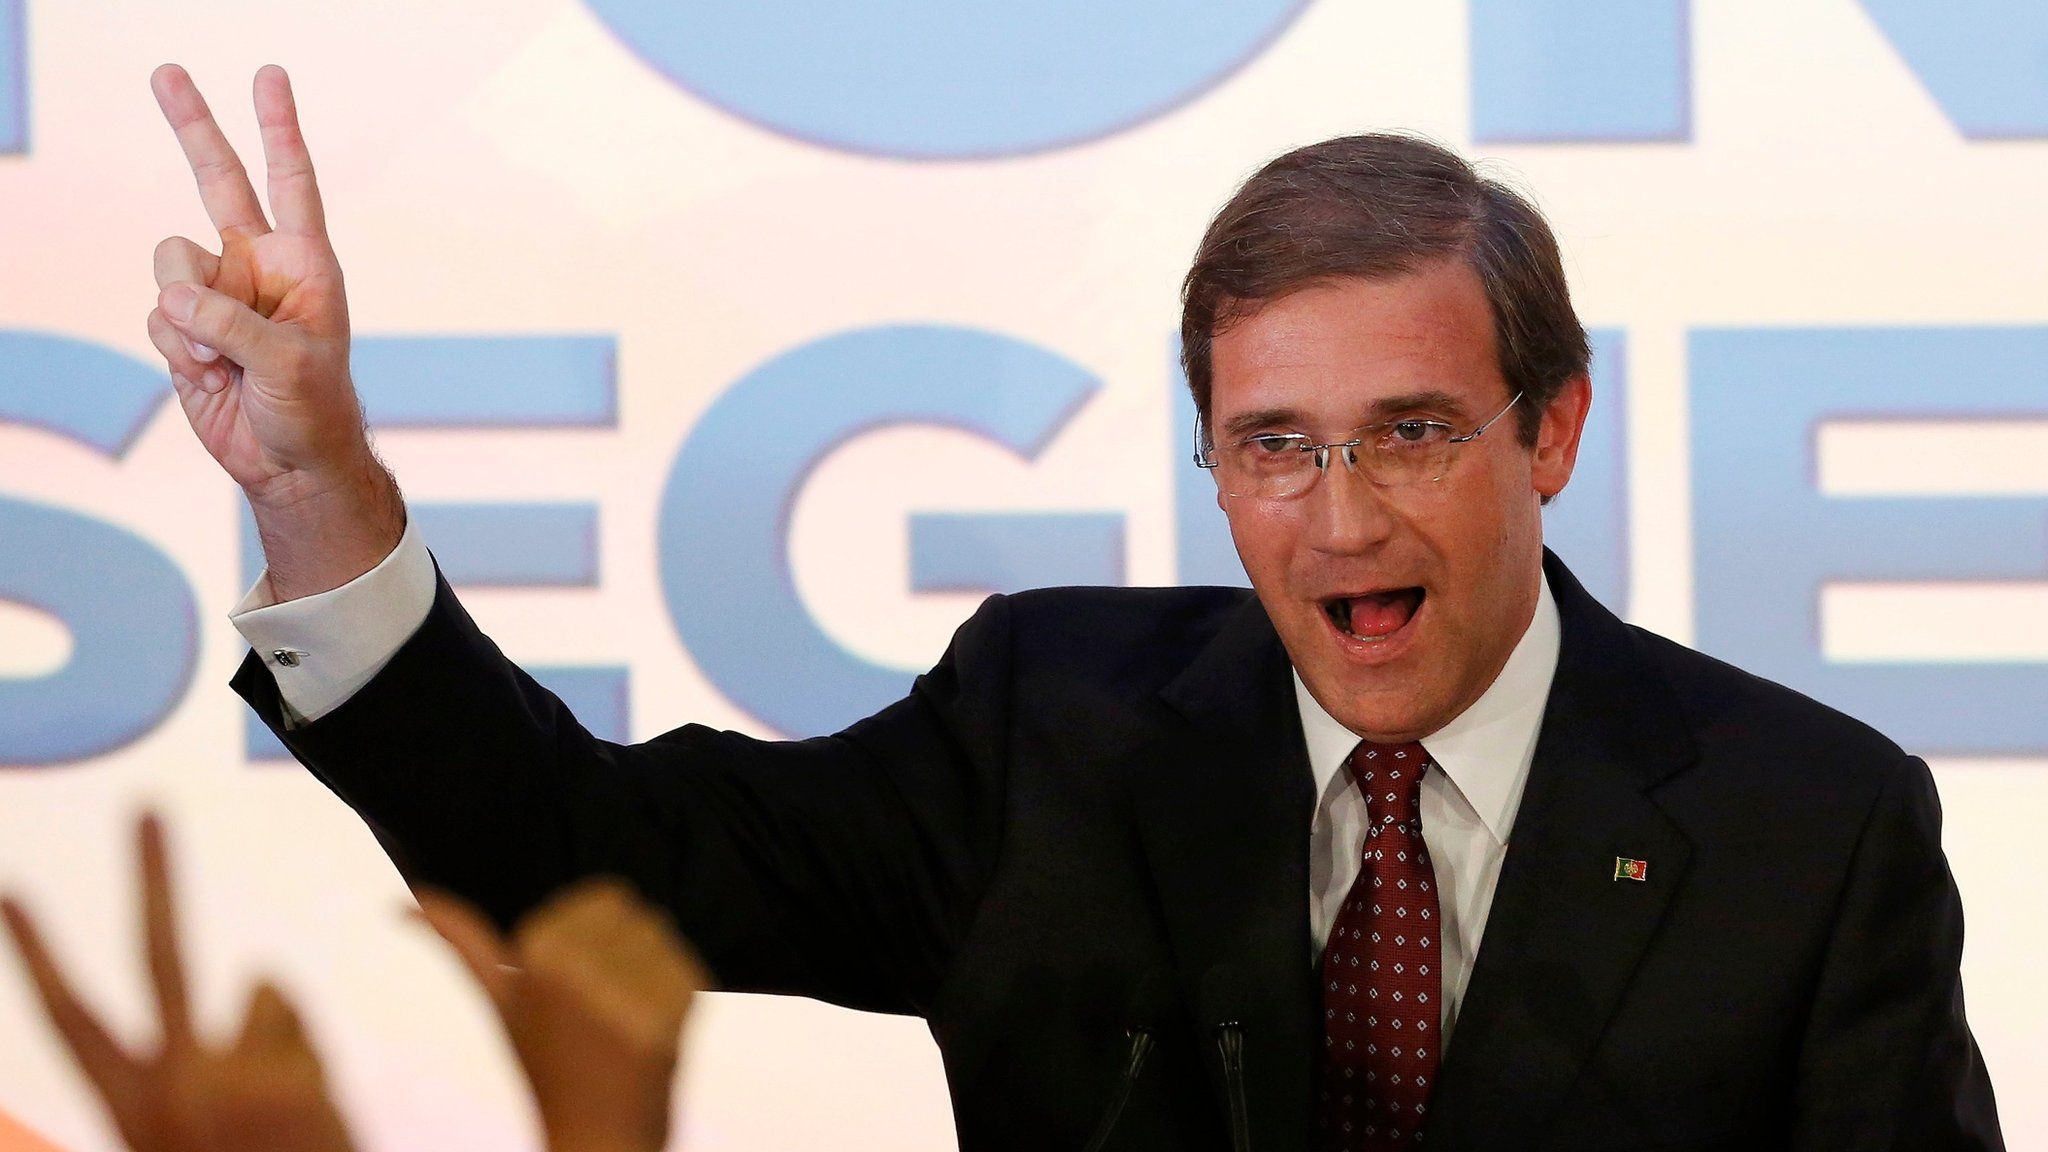 Portugal's Prime Minister Pedro Passos Coelho (left) celebrating after results become clear